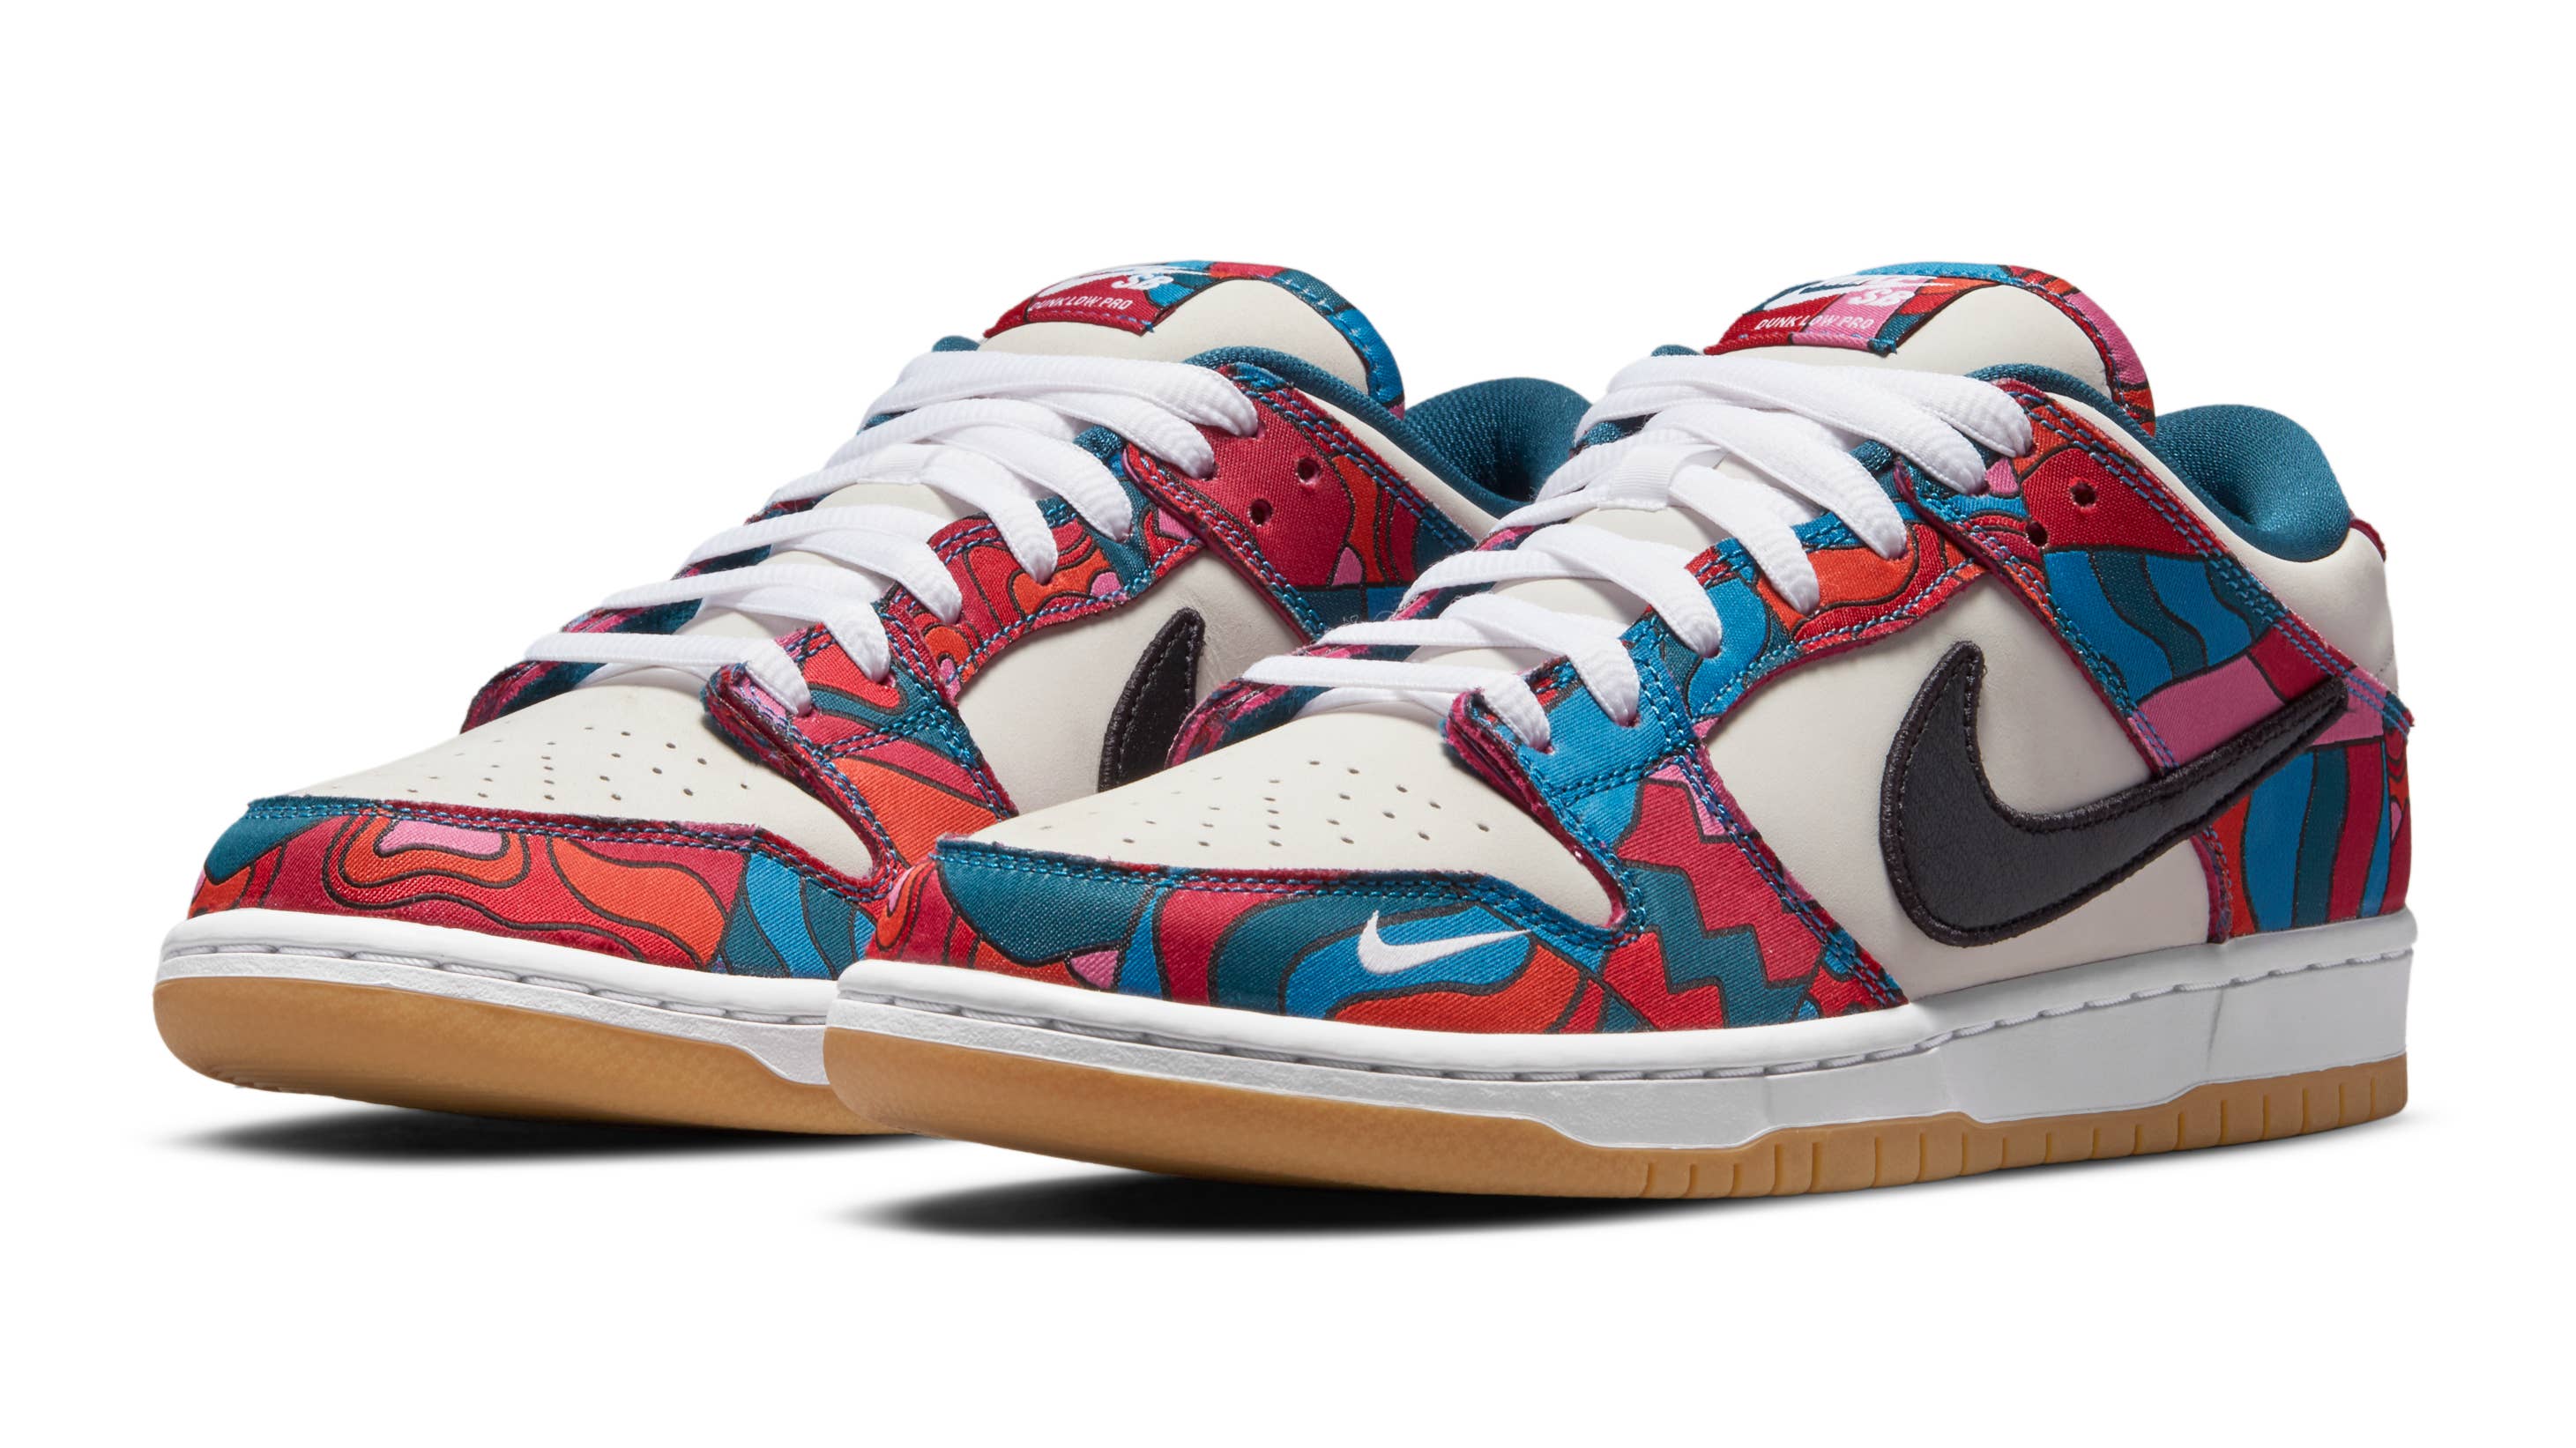 Nike Sb Is Releasing Several Dunk Collabs For The Tokyo Olympics | Complex